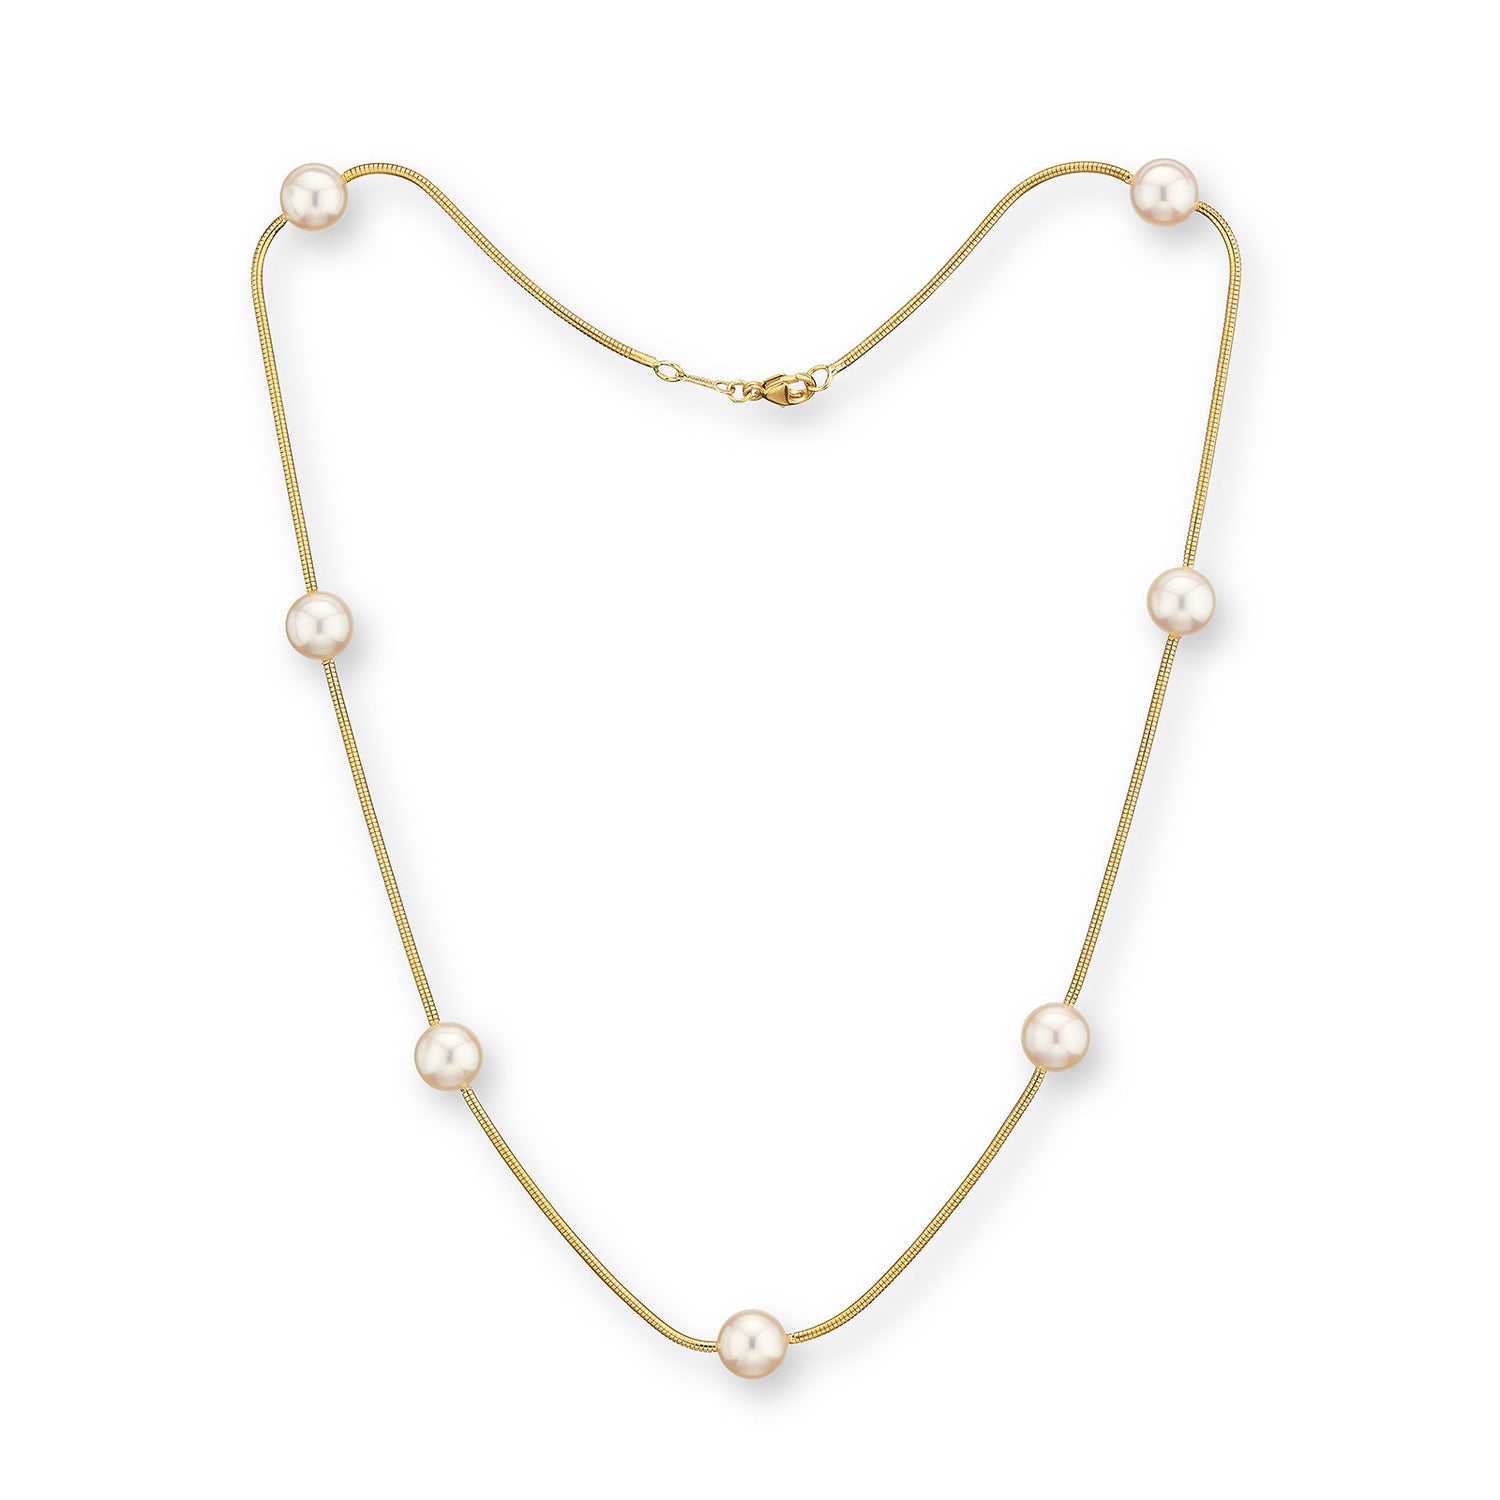 17-inch silk necklace featuring seven spaced-out Akoya cultured pearls